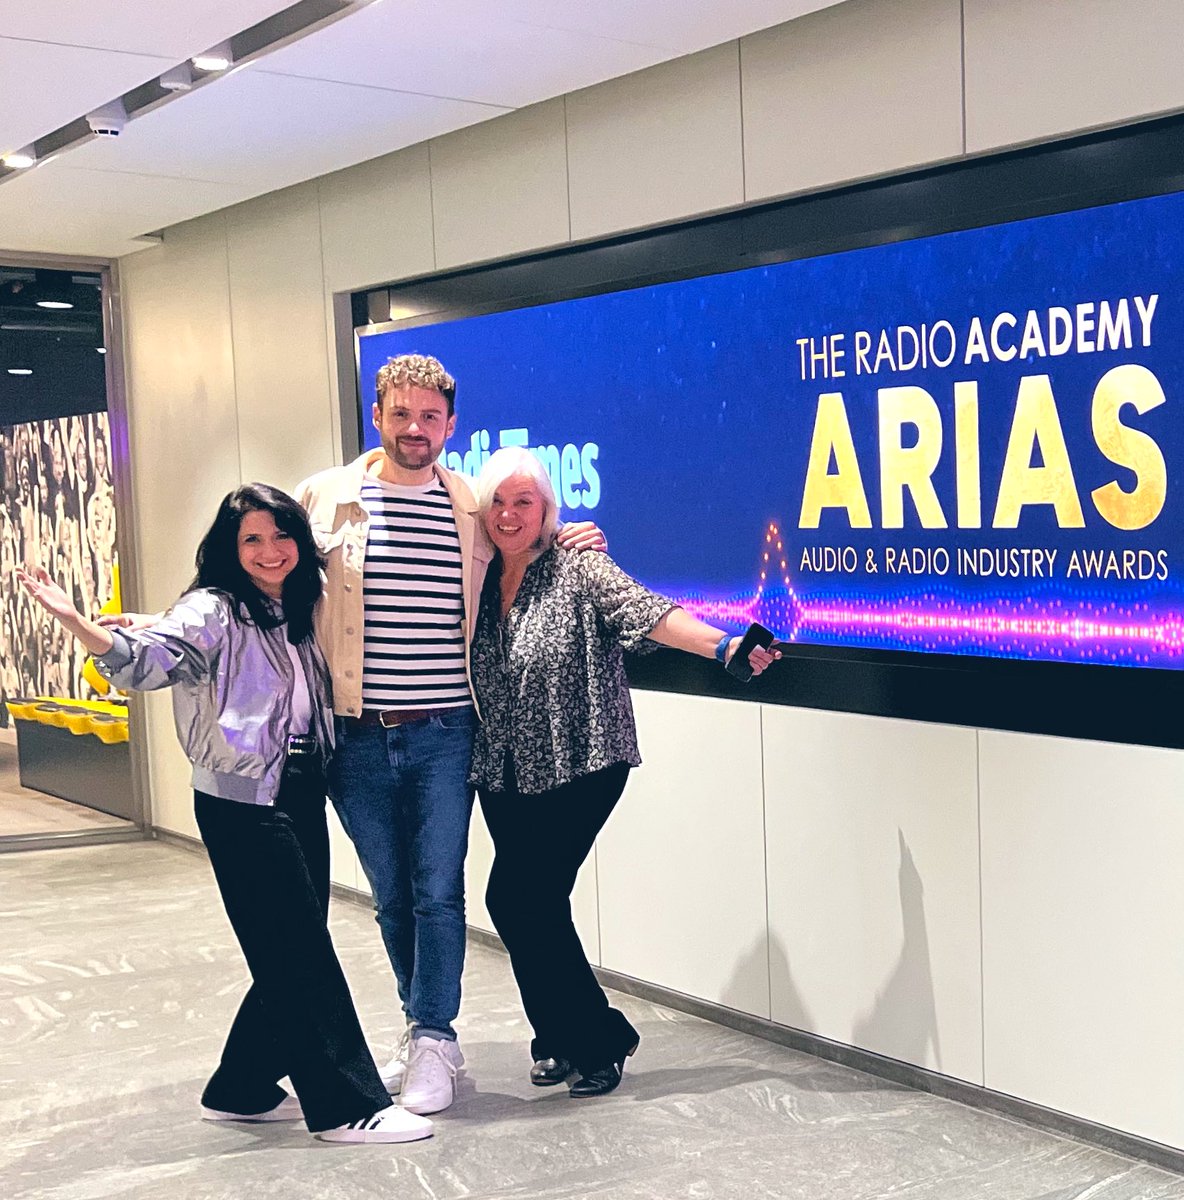 An inspiring night @radioacademy #AriasUK nominations. Many congratulations to all the nominees & good luck! Great fun too catching-up with colleagues past and present! @tomcroasdell @sandywarr @journosaads @dhrutishah @AnuAnandHall @EdwardAdoo 🤩📻🎧x